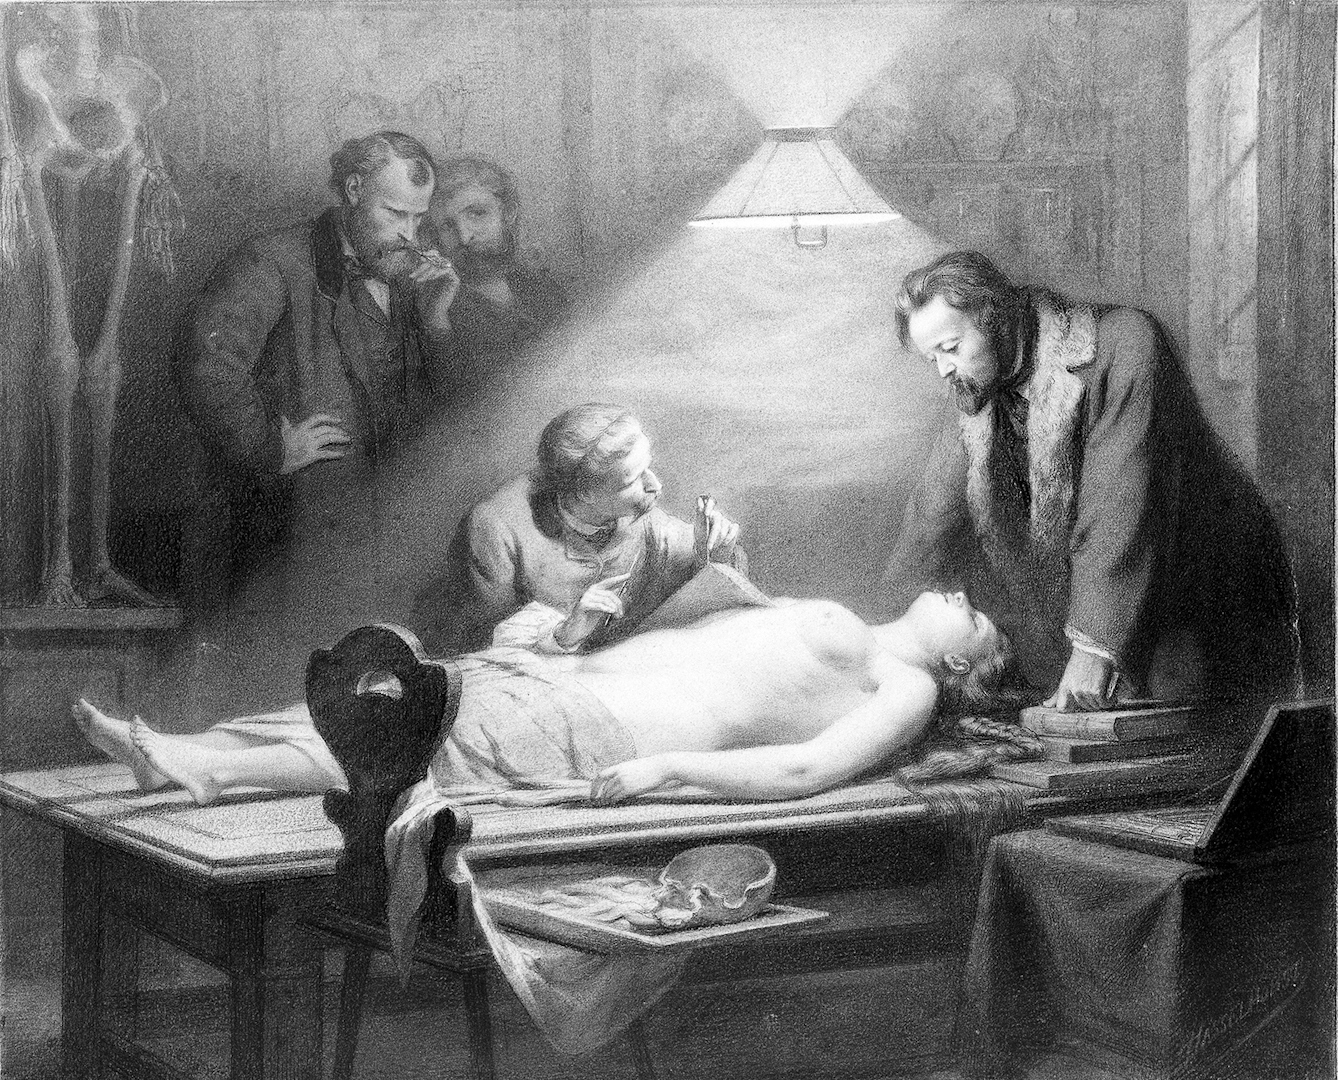 The dissection of a young, beautiful woman directed by J. Ch. G. Lucae (1814-1885) in order to determine the ideal female proportions. Chalk drawing by J. H. Hasselhorst, 1864.